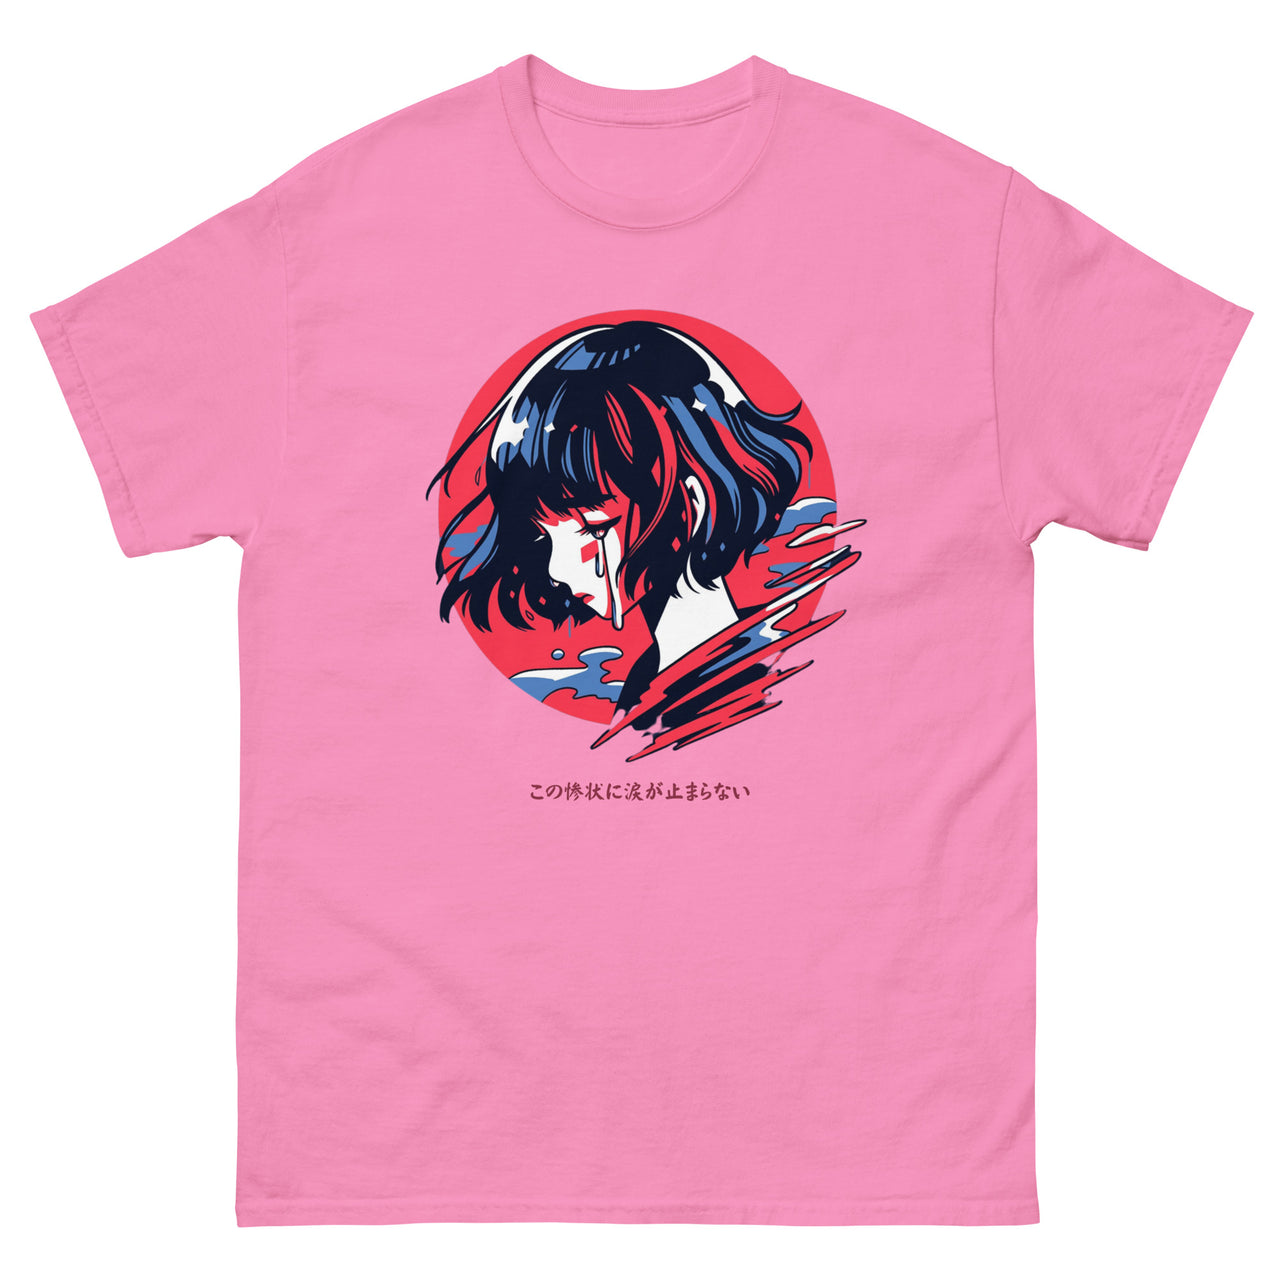 Anime Girl in Tragedy T-Shirt